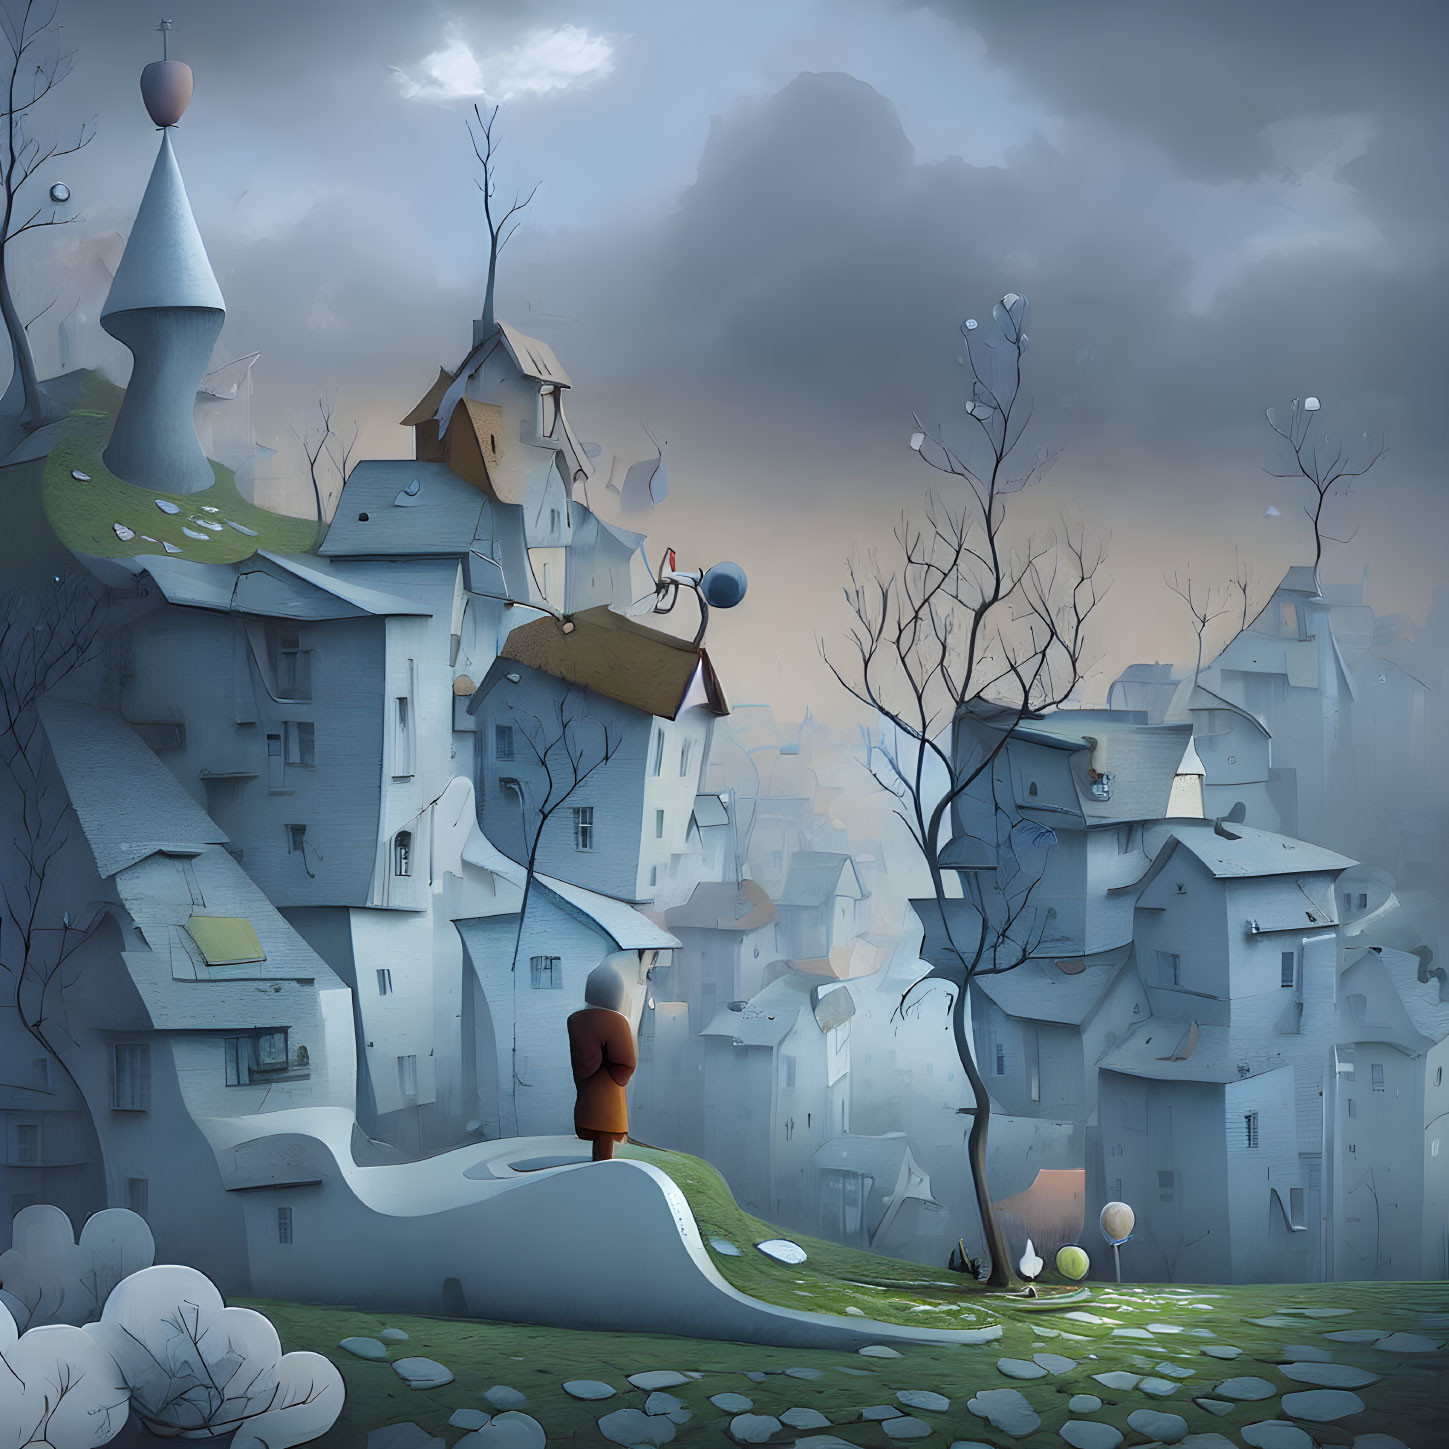 Clustered uneven houses and towers in a whimsical village under a gloomy sky